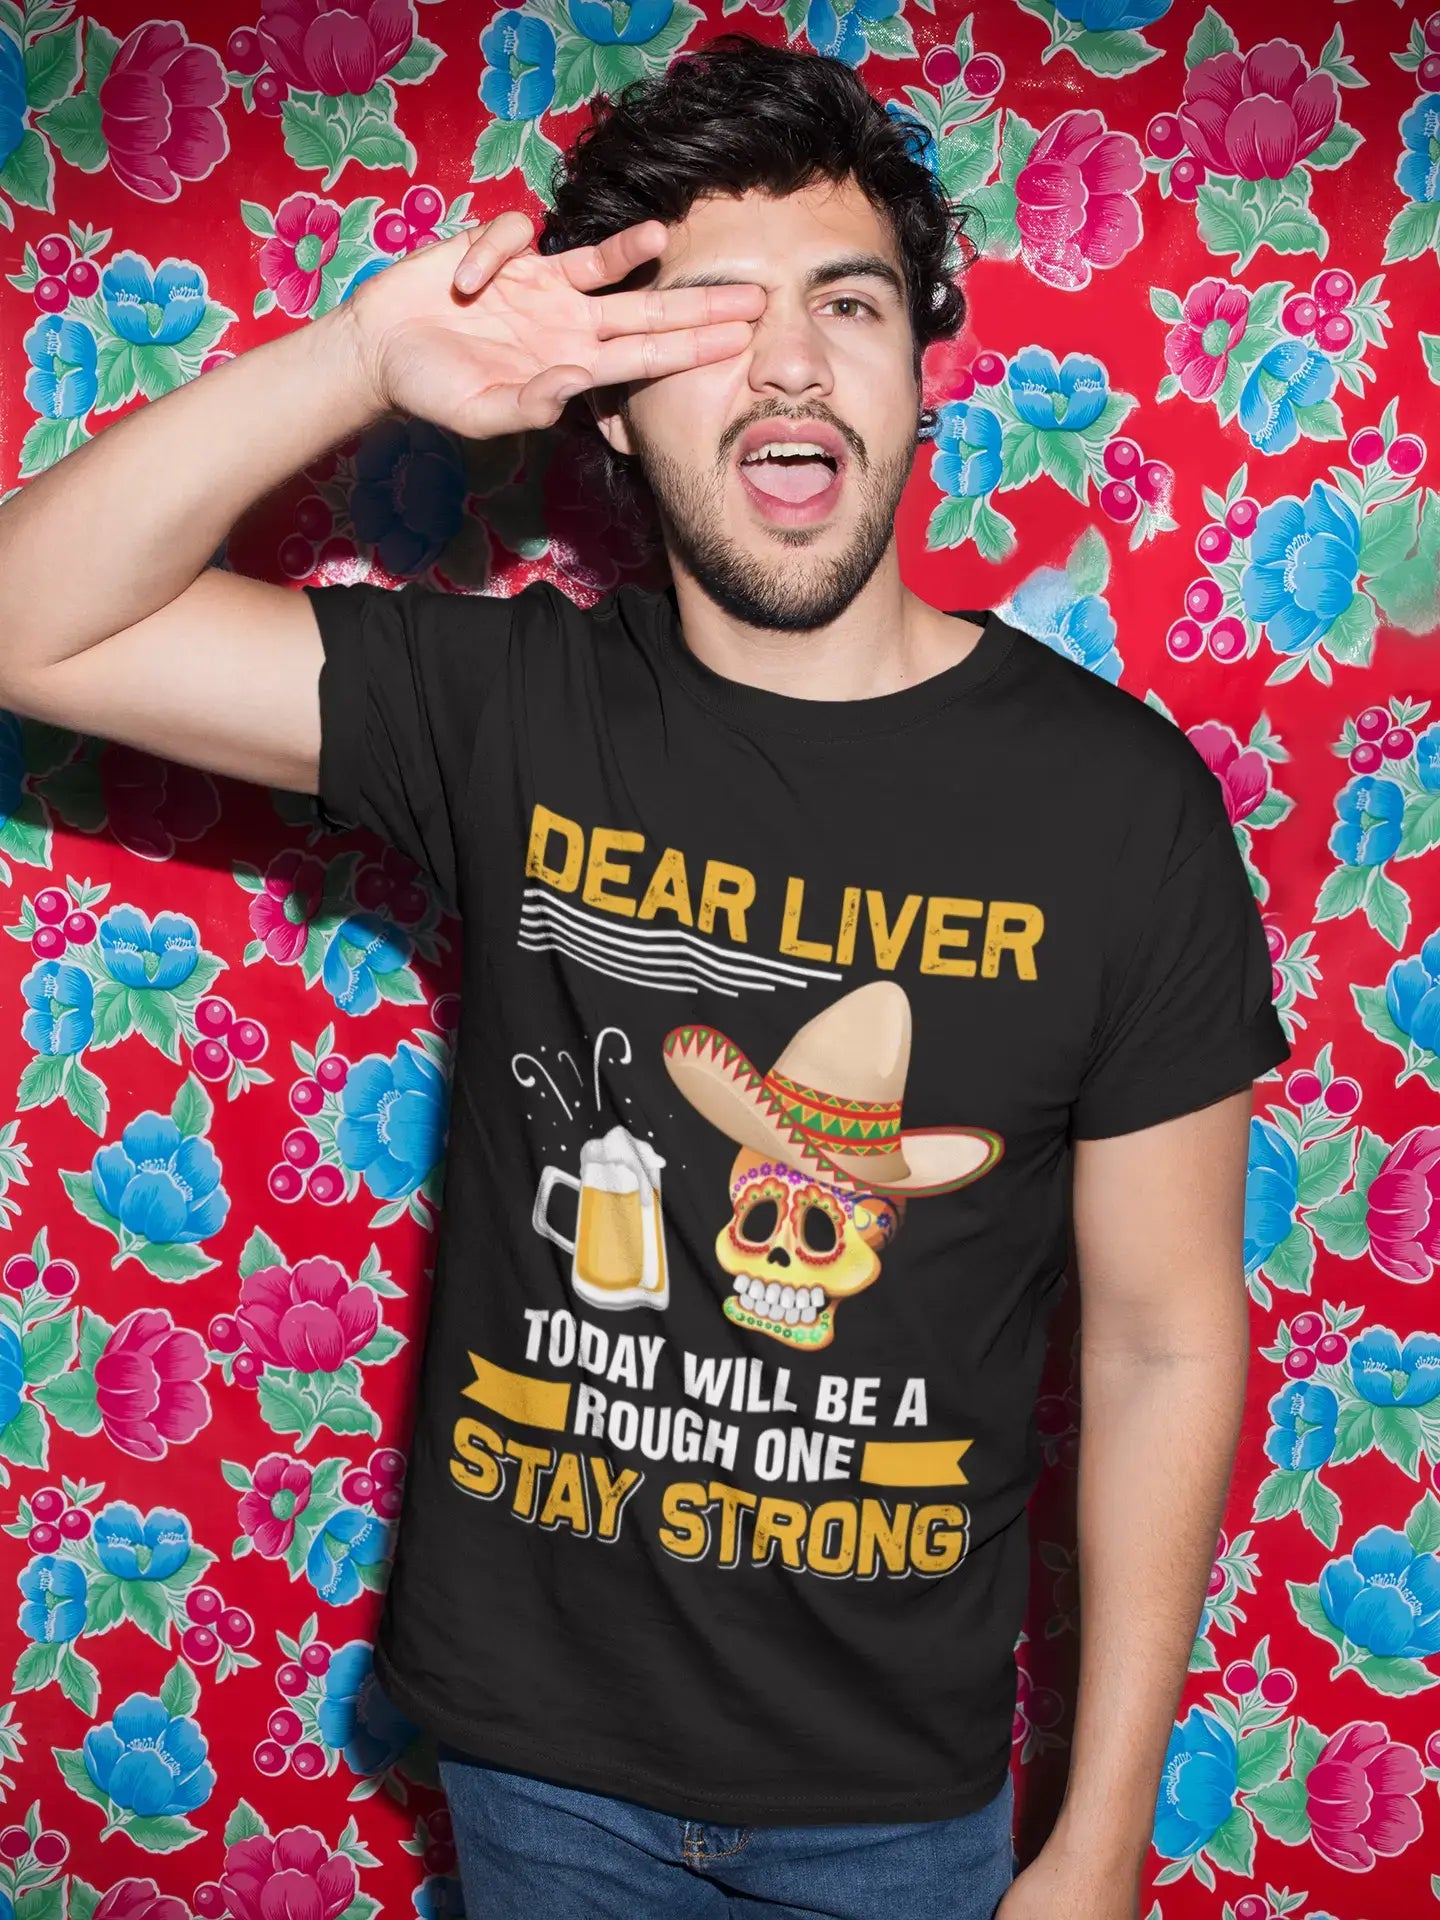 ULTRABASIC Men's T-Shirt Dear Liver Today Will Be a Rough One - Stay Strong Beer Lover Tee Shirt